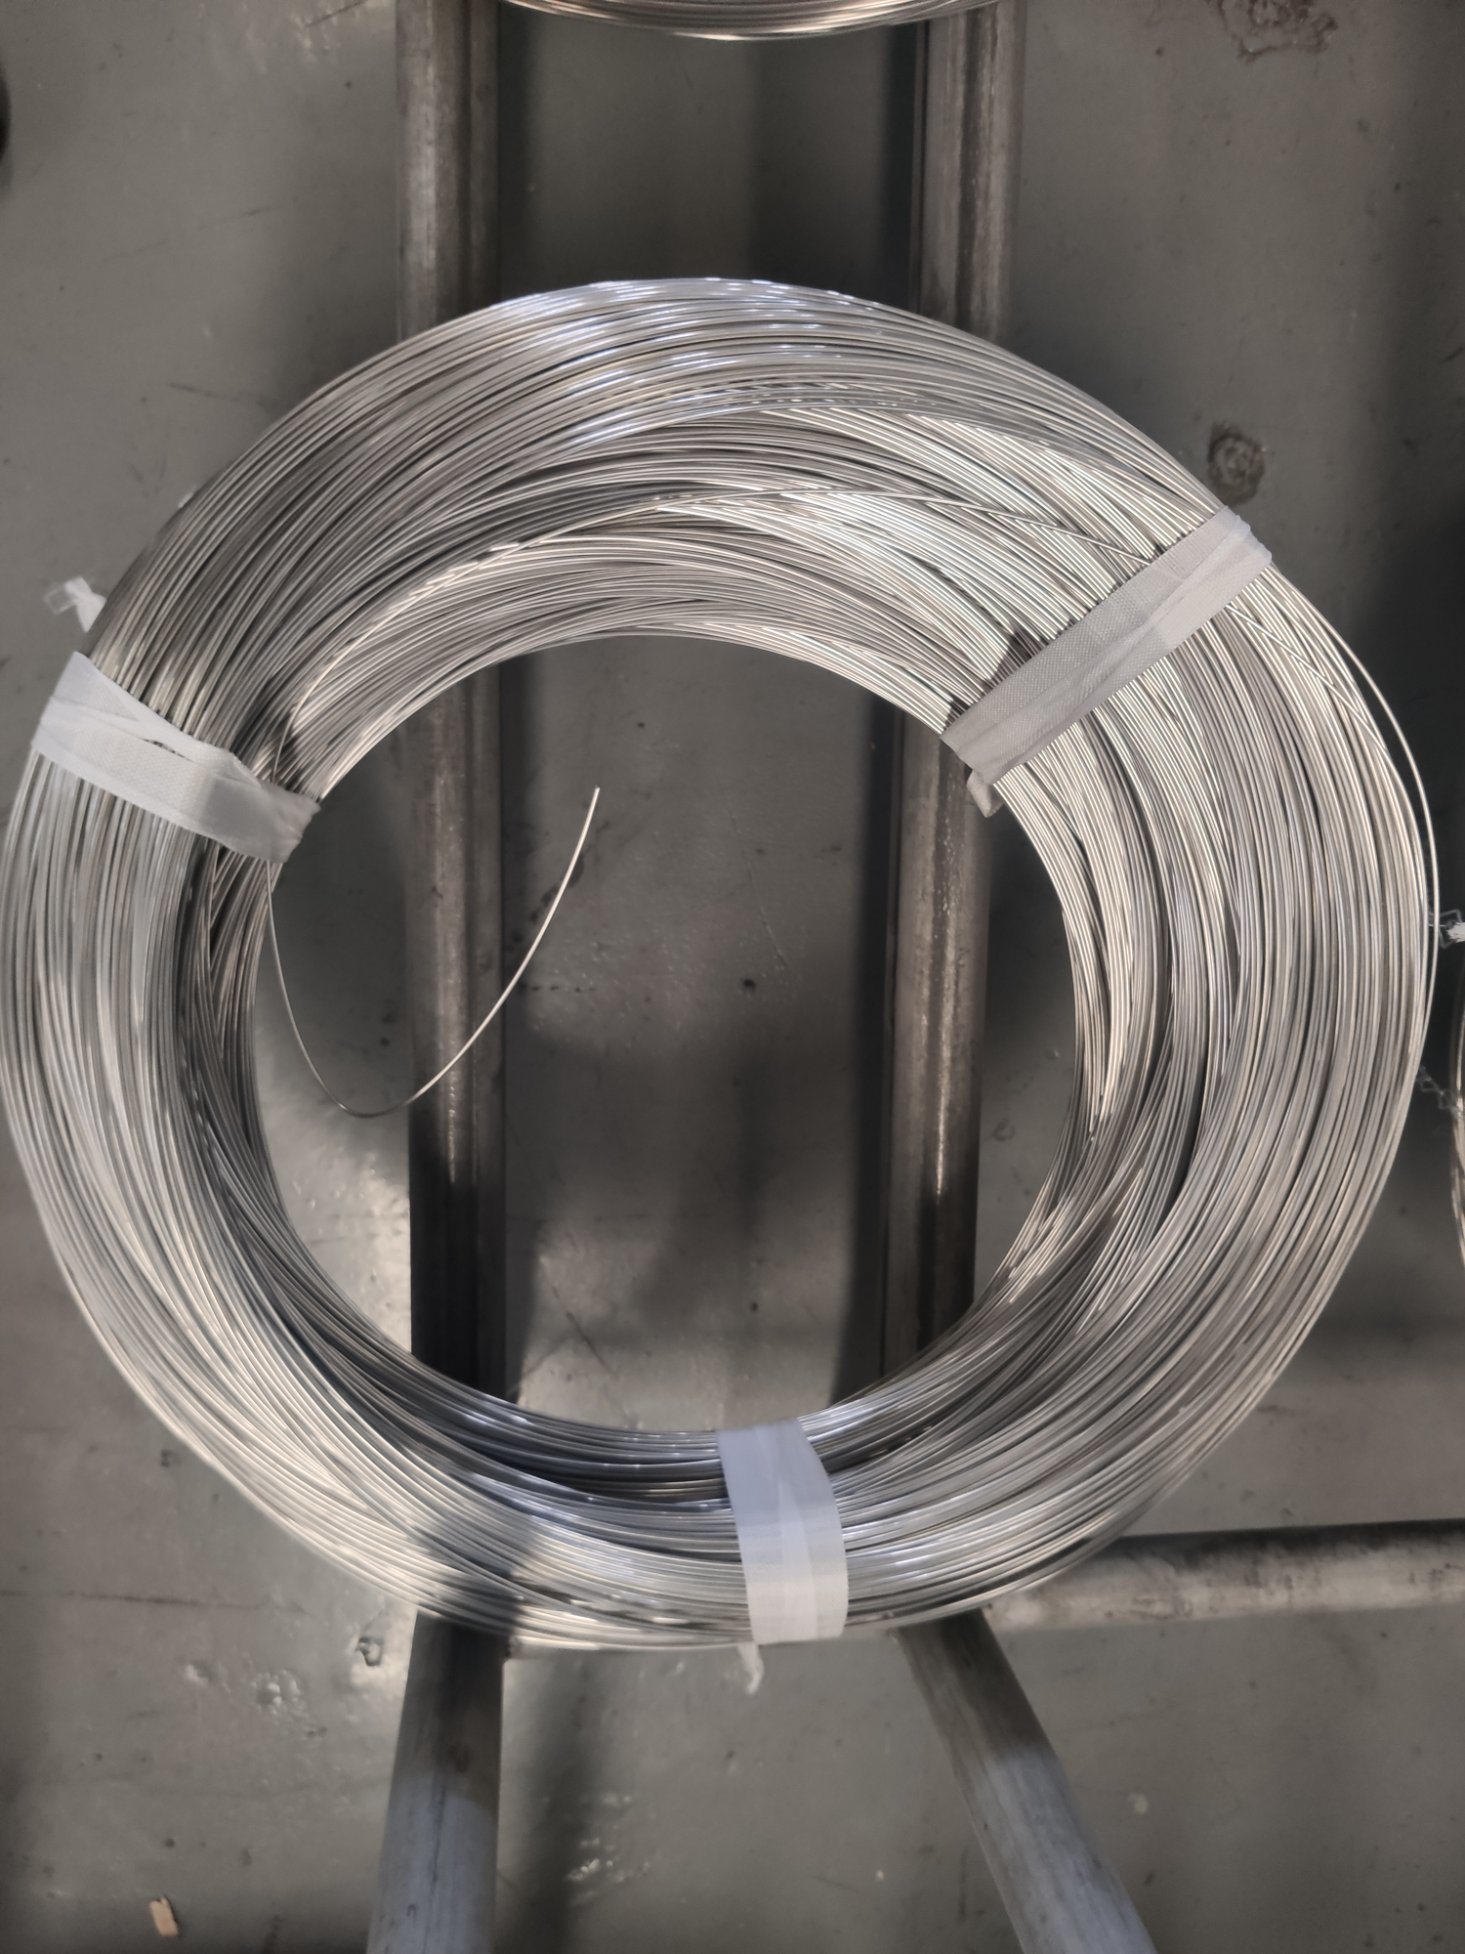 Stainless Steel Conveying Net Use 304 Wea 0.8-2.5mm High-Speed High Strength Quality Low Price Smooth Stainless Steel Weaving Wire Braiding Wire